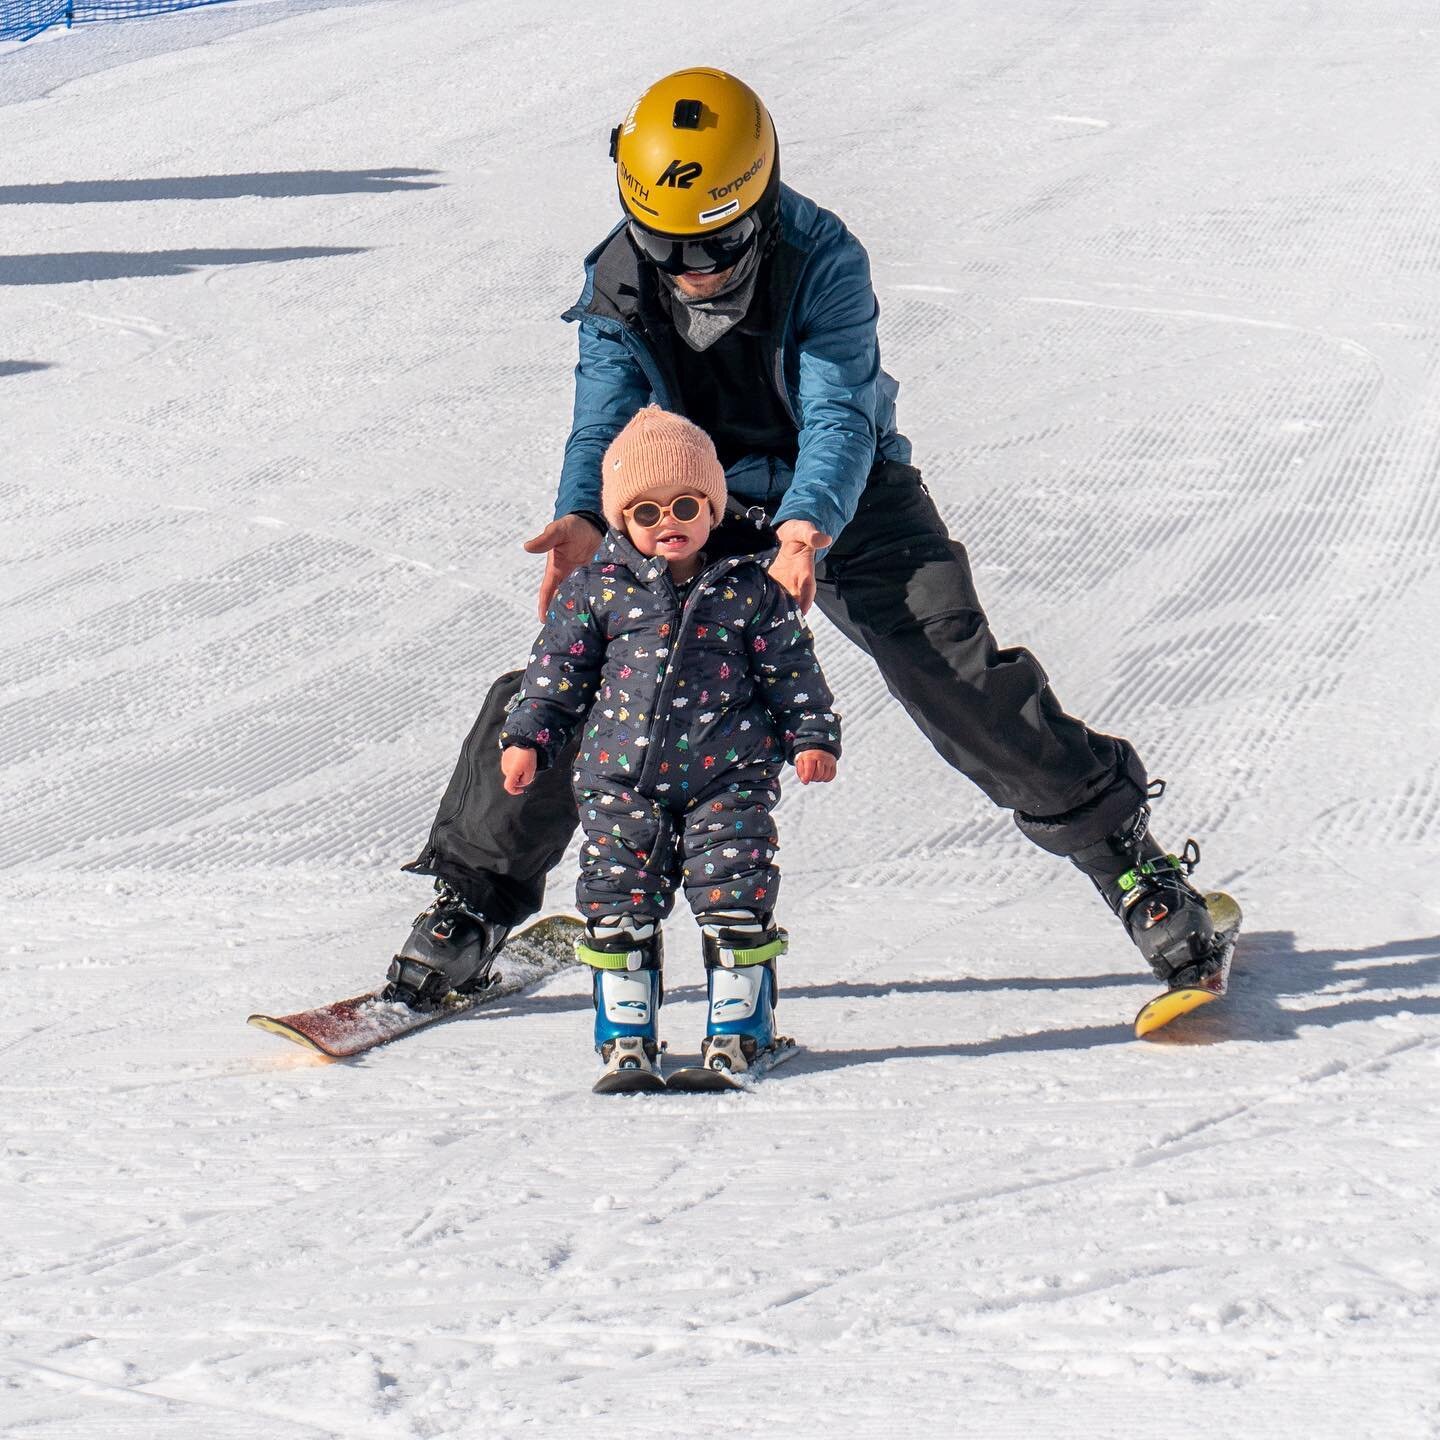 Turns out the stoke of skiing is infectious... Proud Dada. I miss winter...

Photo: @little_difference